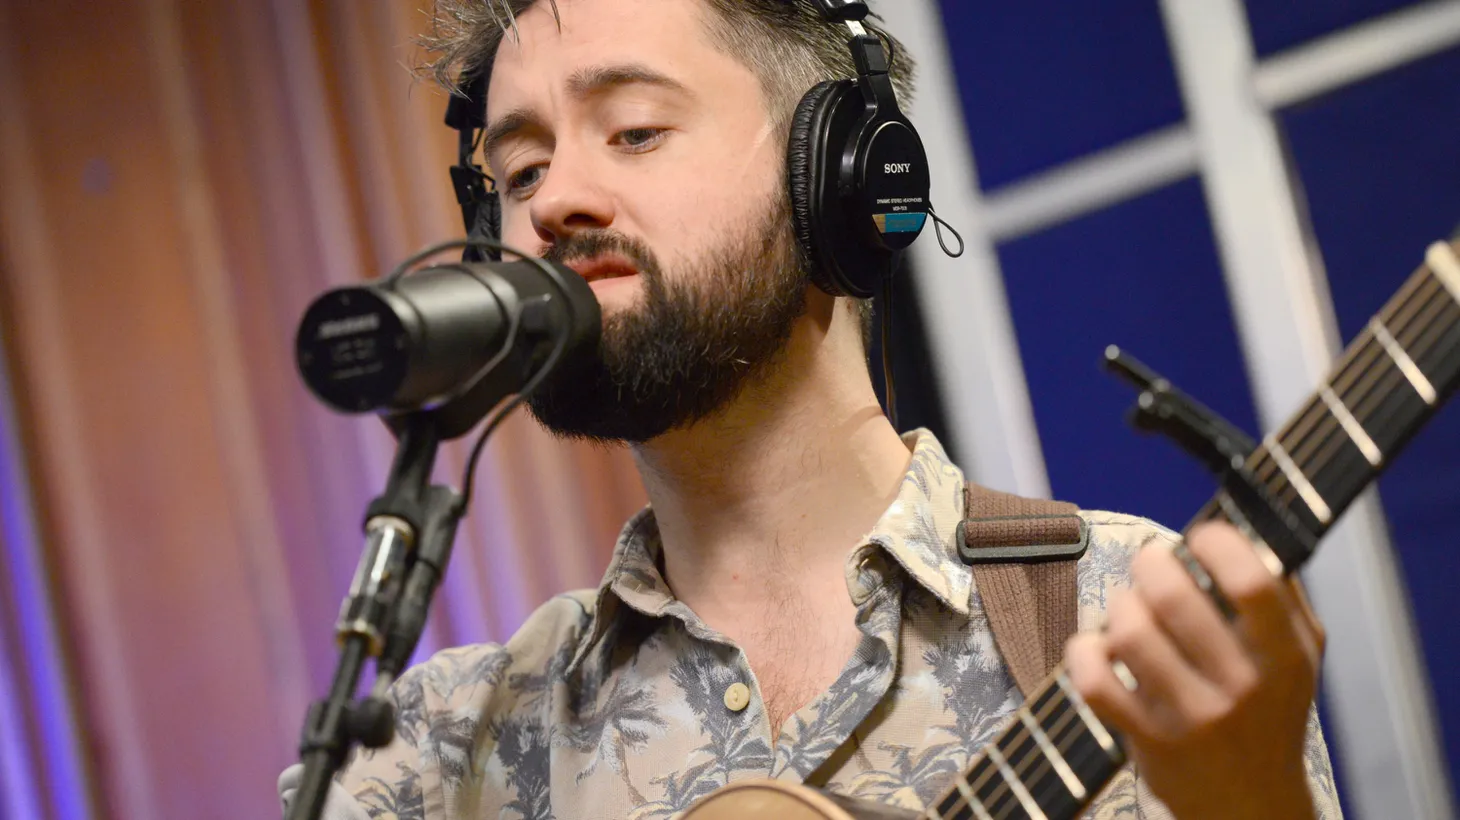 Conor O'Brien, aka Villagers, is able to strike an emotional chord with his music.